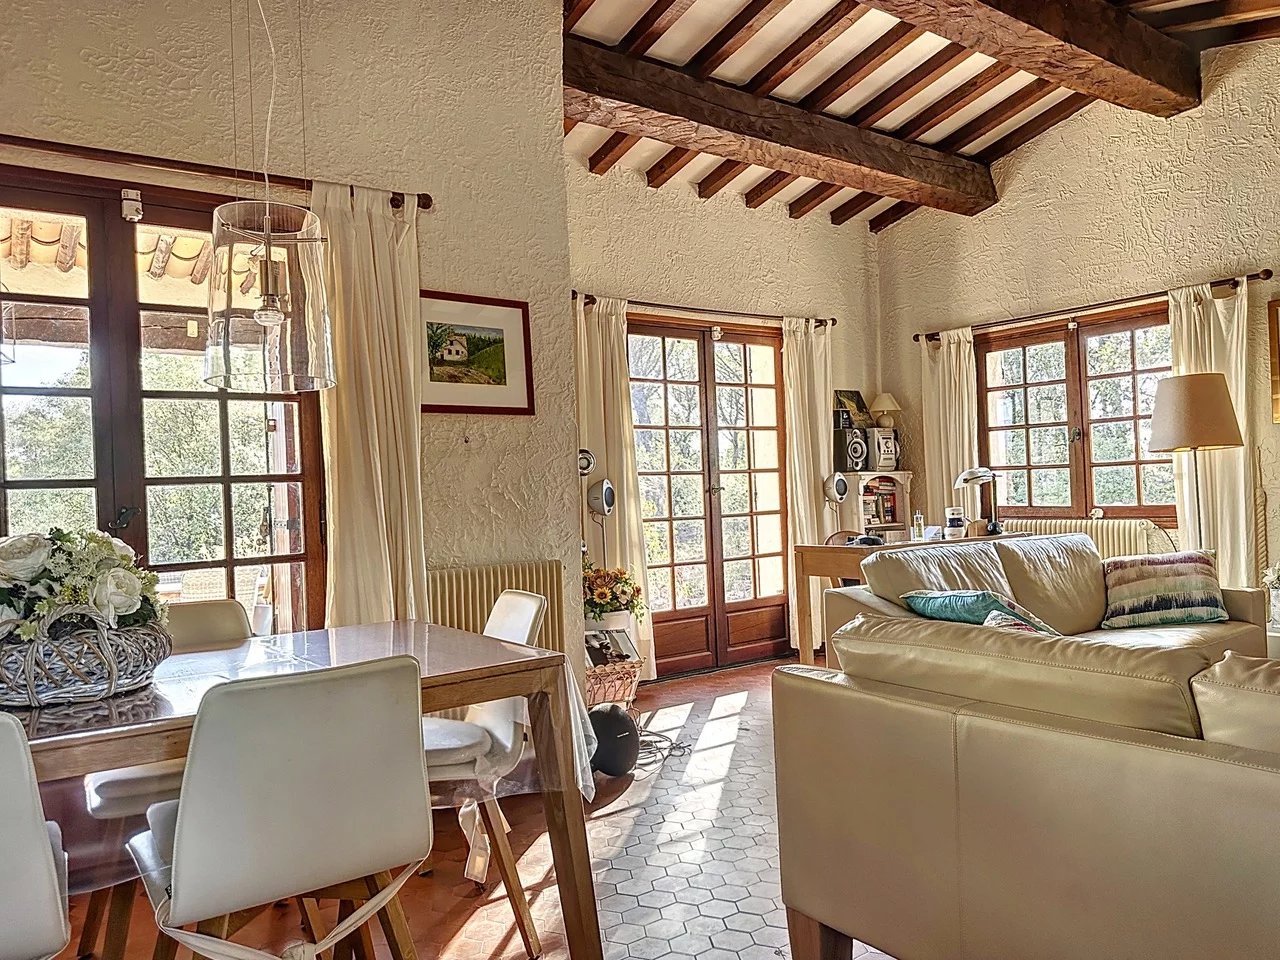 Cozy villa on magnificent grounds, half an hour from the coast